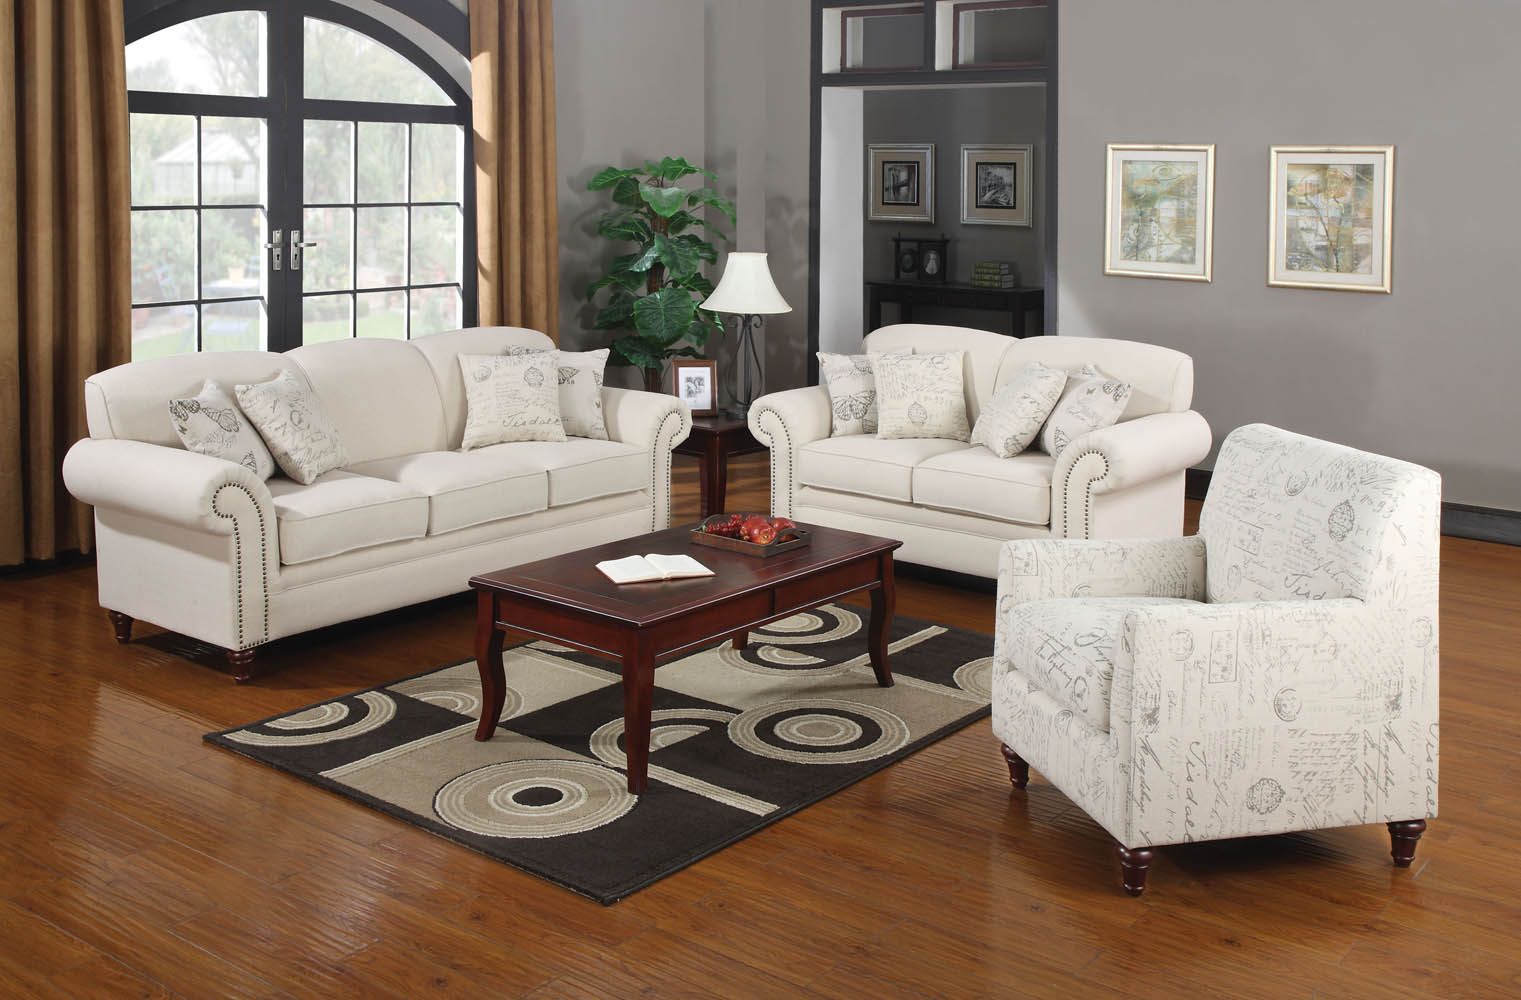 3 Piece Oatmeal Linen Fabric Sofa Set Pertaining To 3 Piece Console Tables (View 14 of 20)